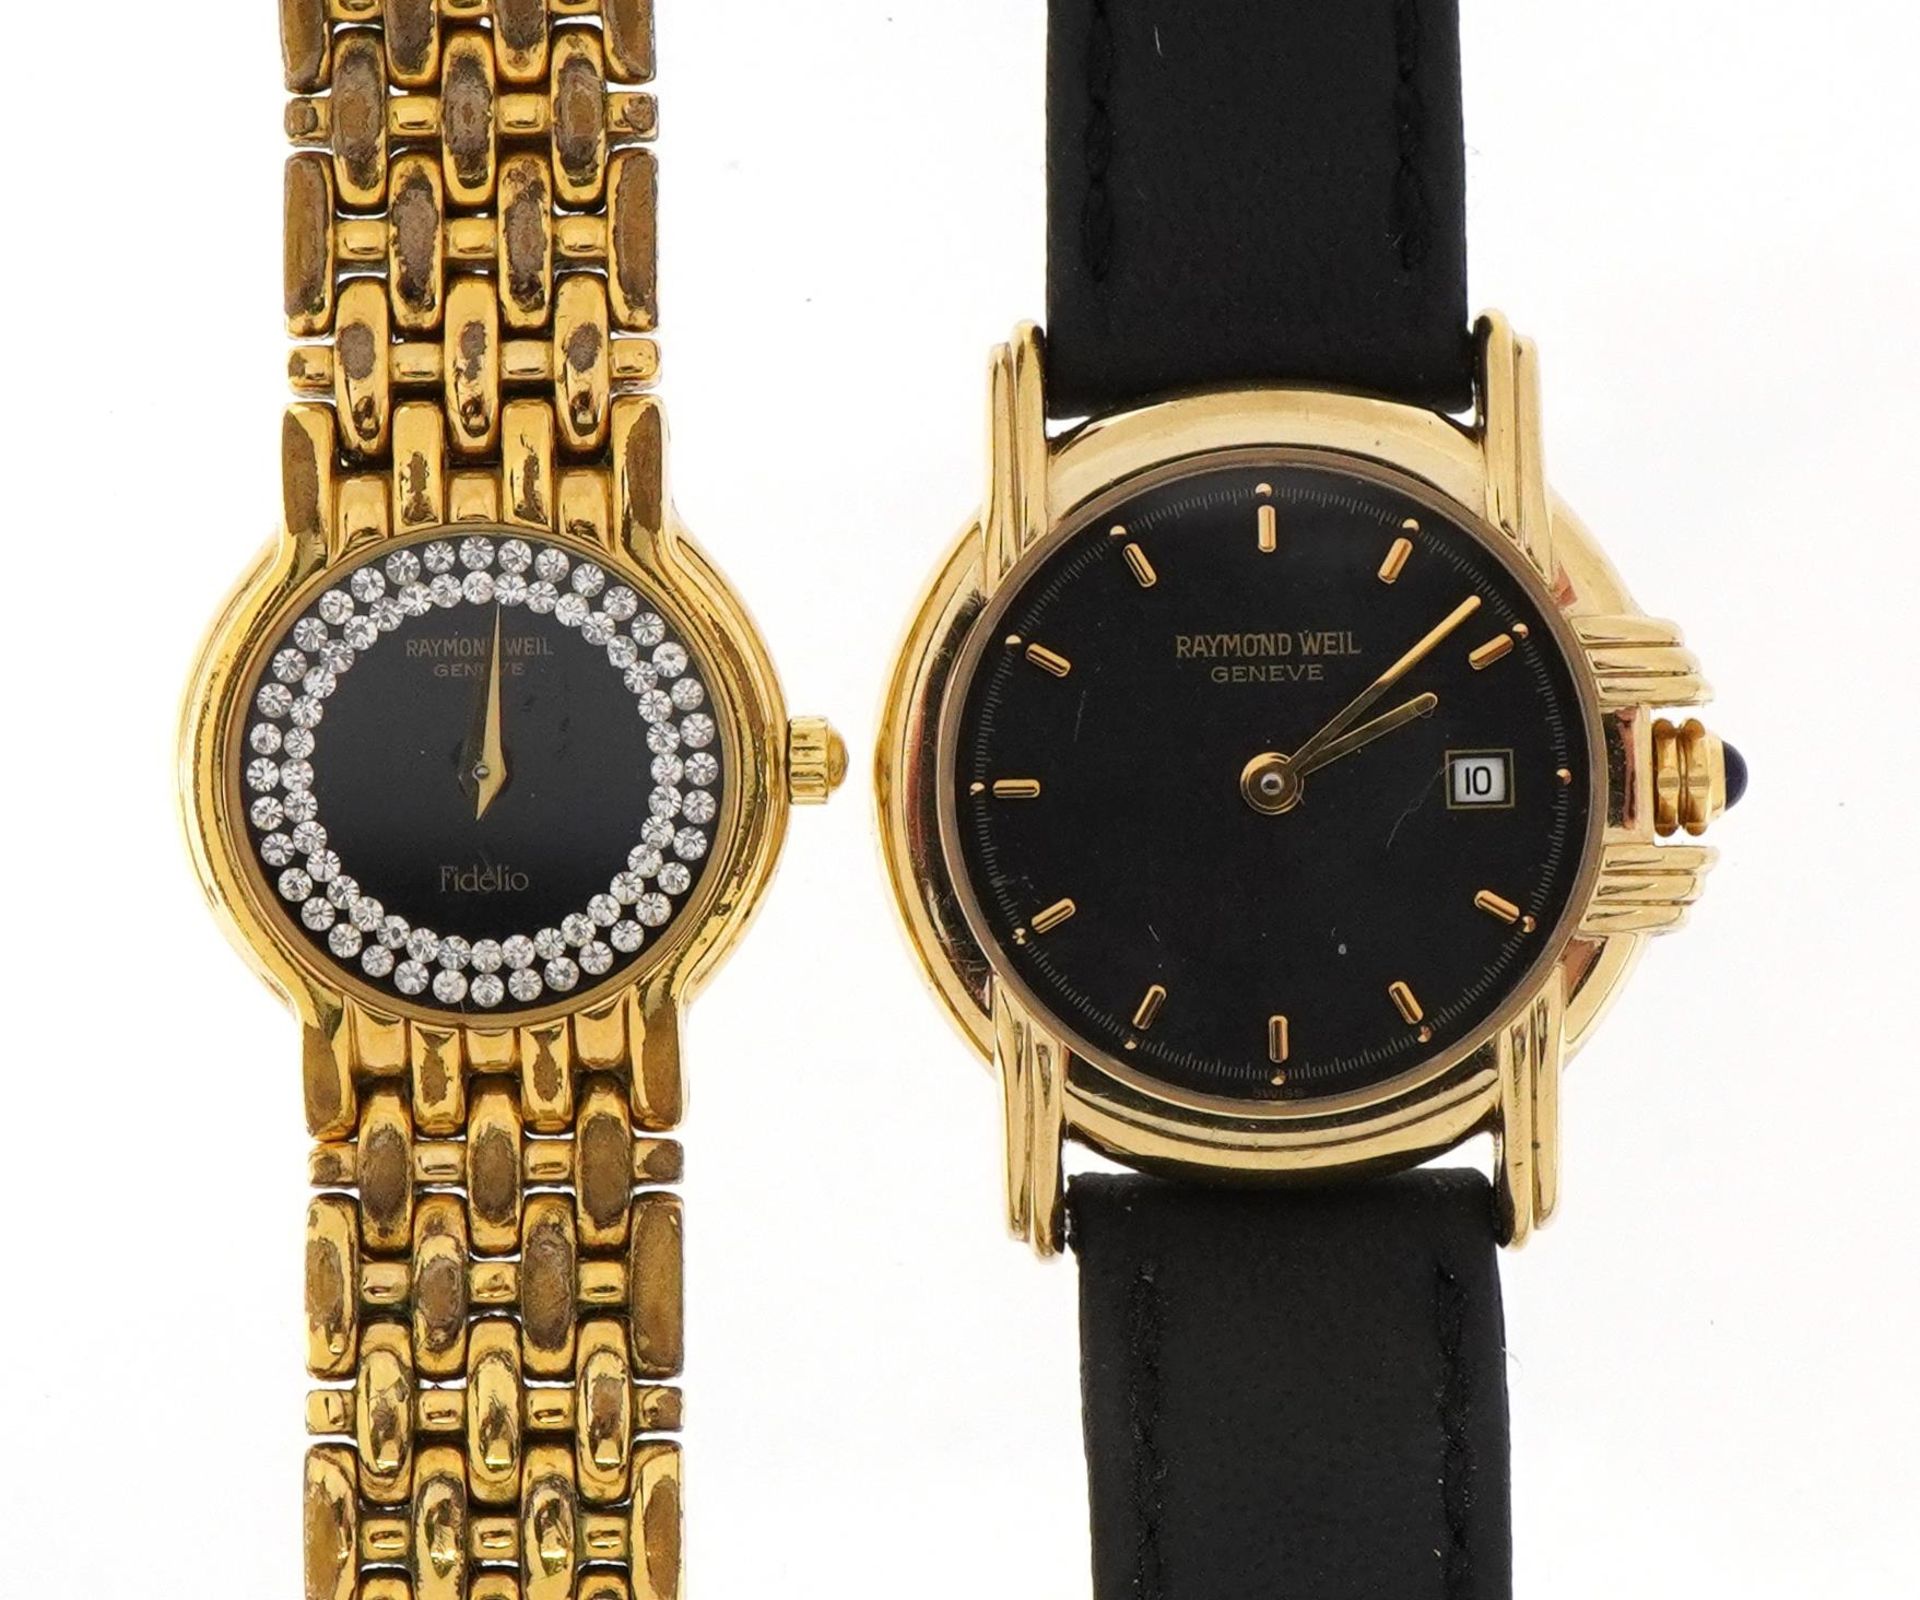 Raymond Weil, two ladies Raymond Weil Geneve wristwatches including Fidelio, the largest 24mm in